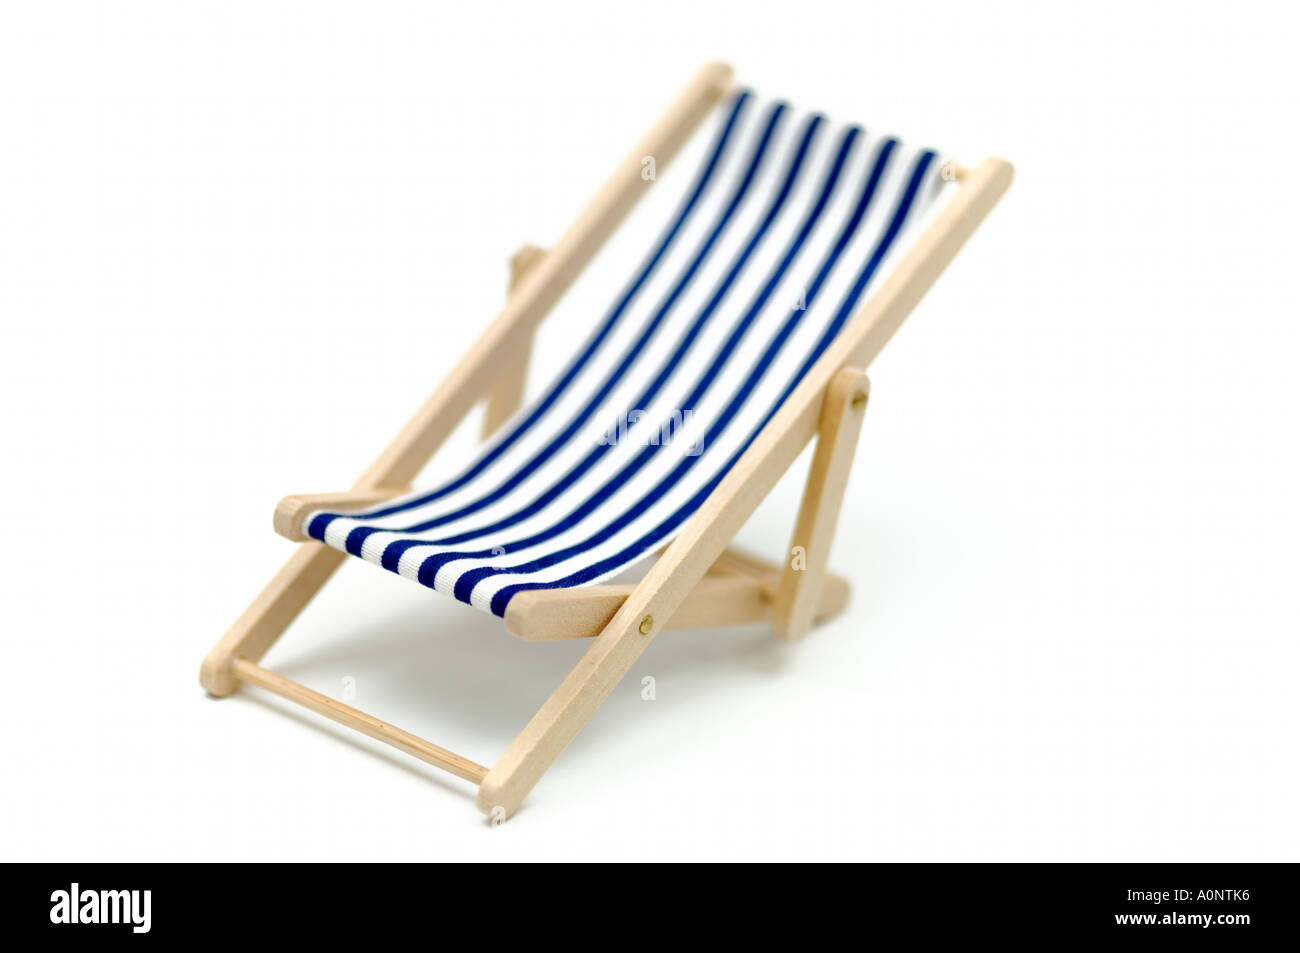 Deck chair on white background Stock Photo